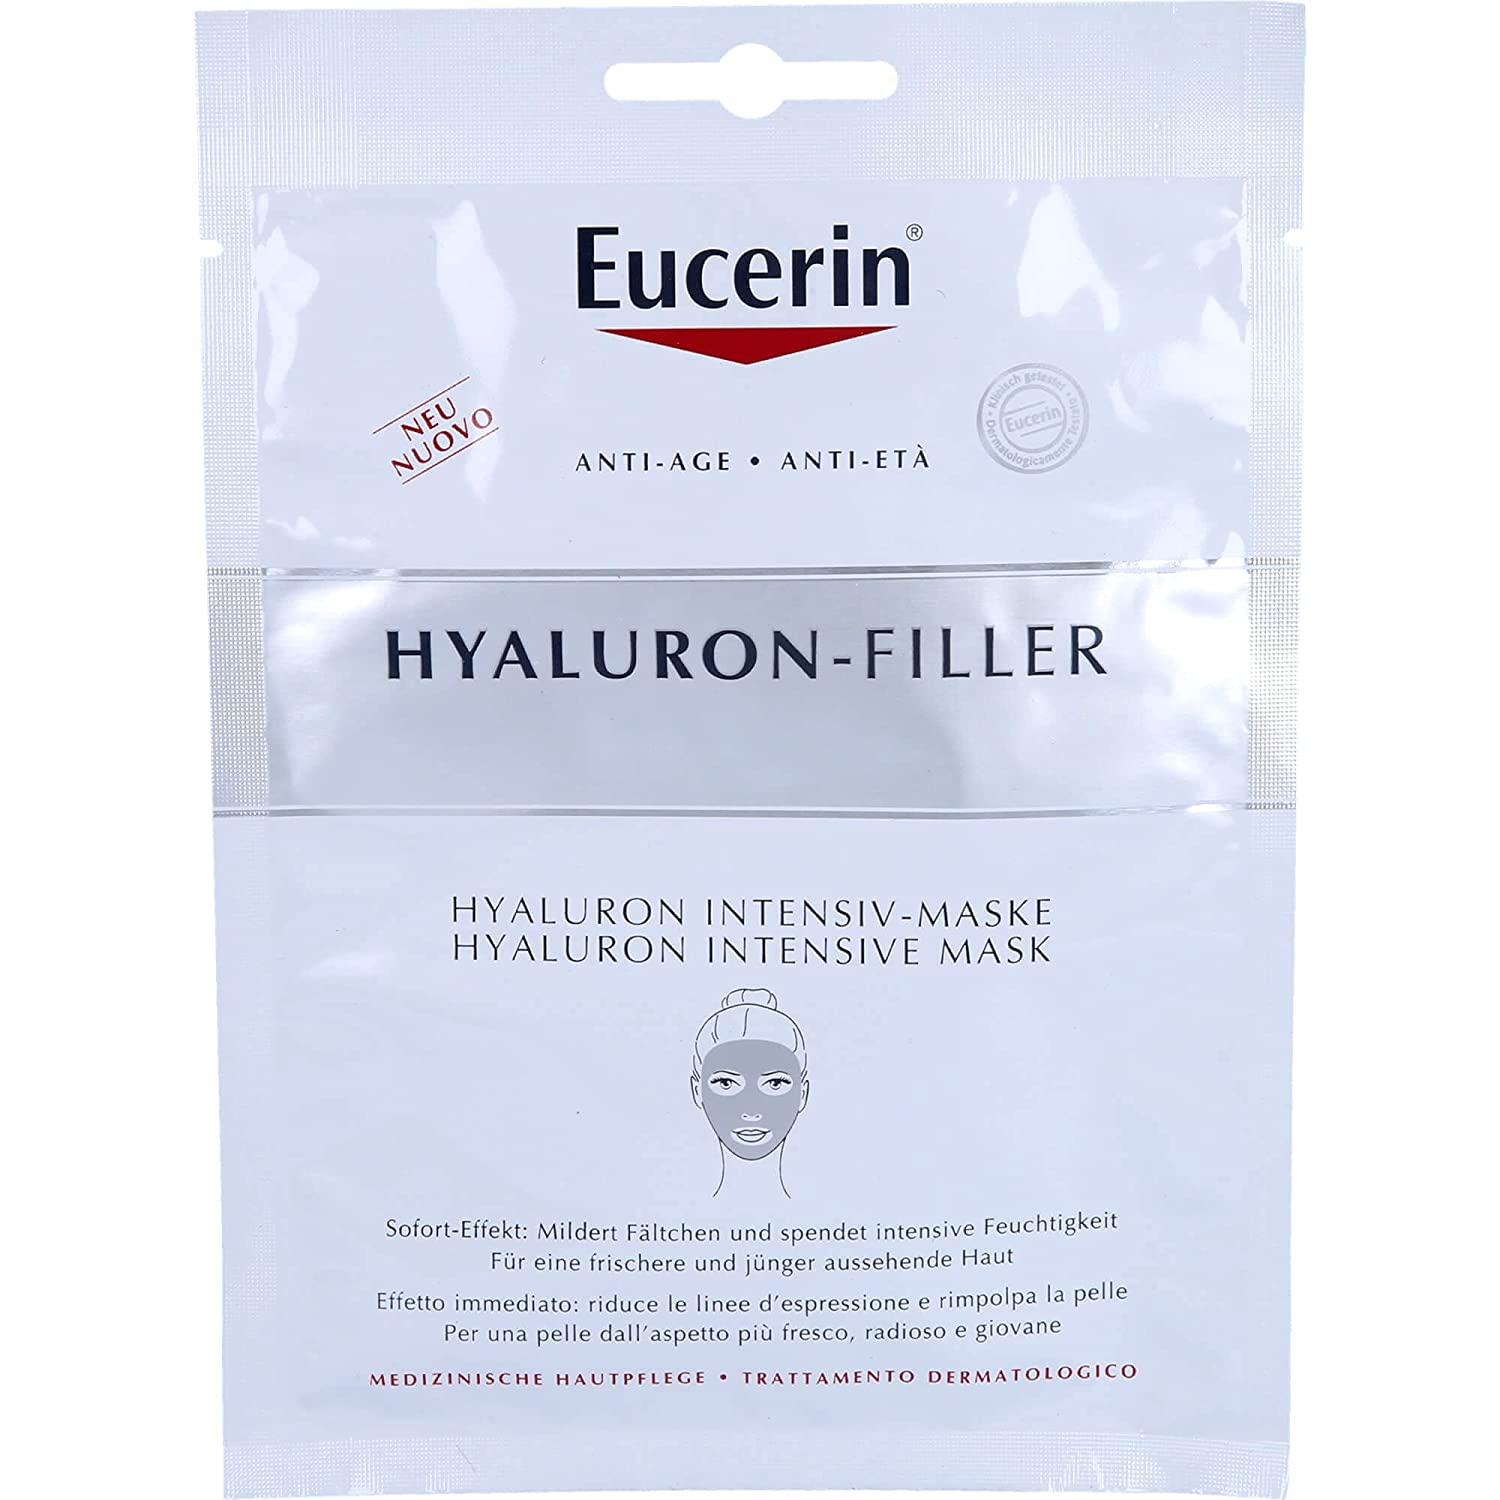 Eucerin Anti-Ageing Hyaluronic Filler Intensive Mask Pack of 1, ‎clear white